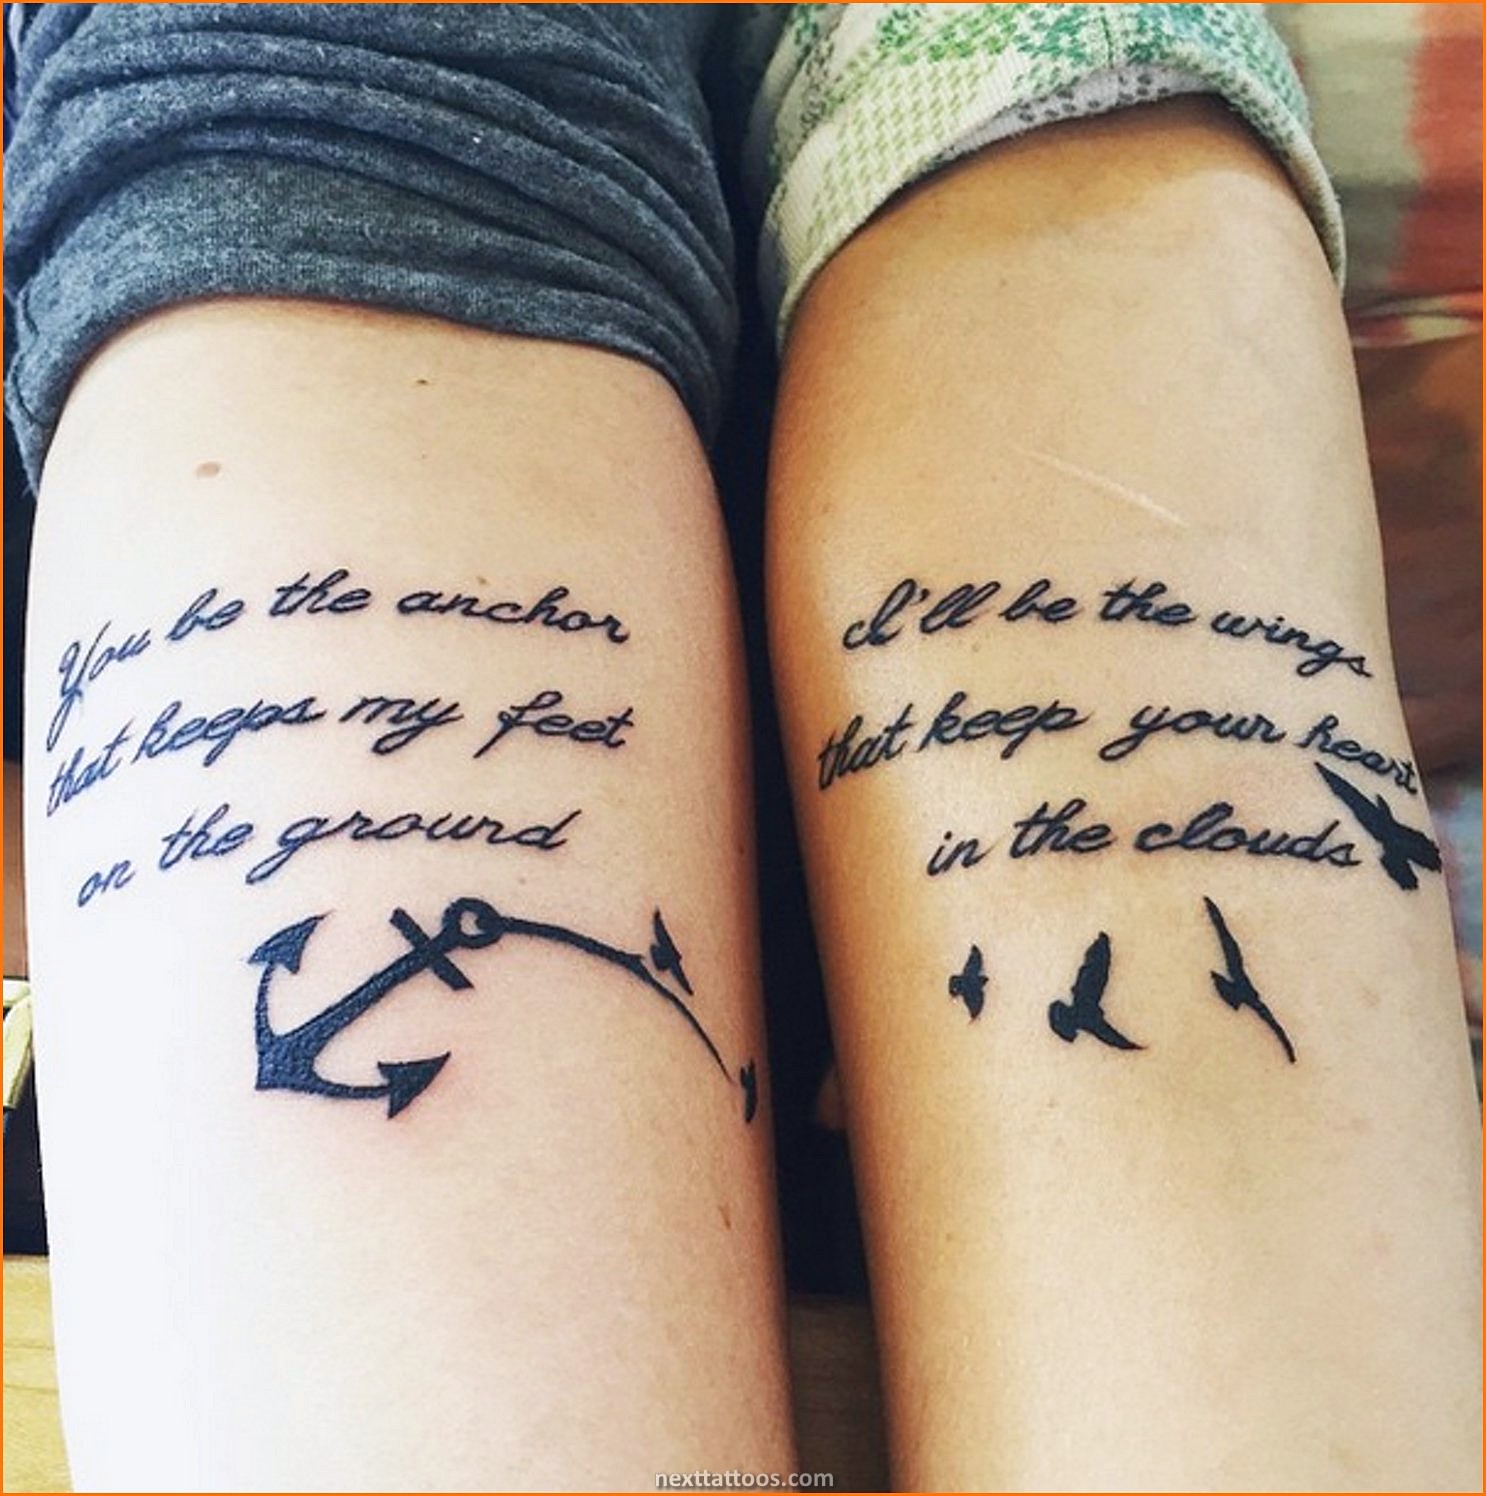 Tattoos of Male and Female Best Friend Tattoos